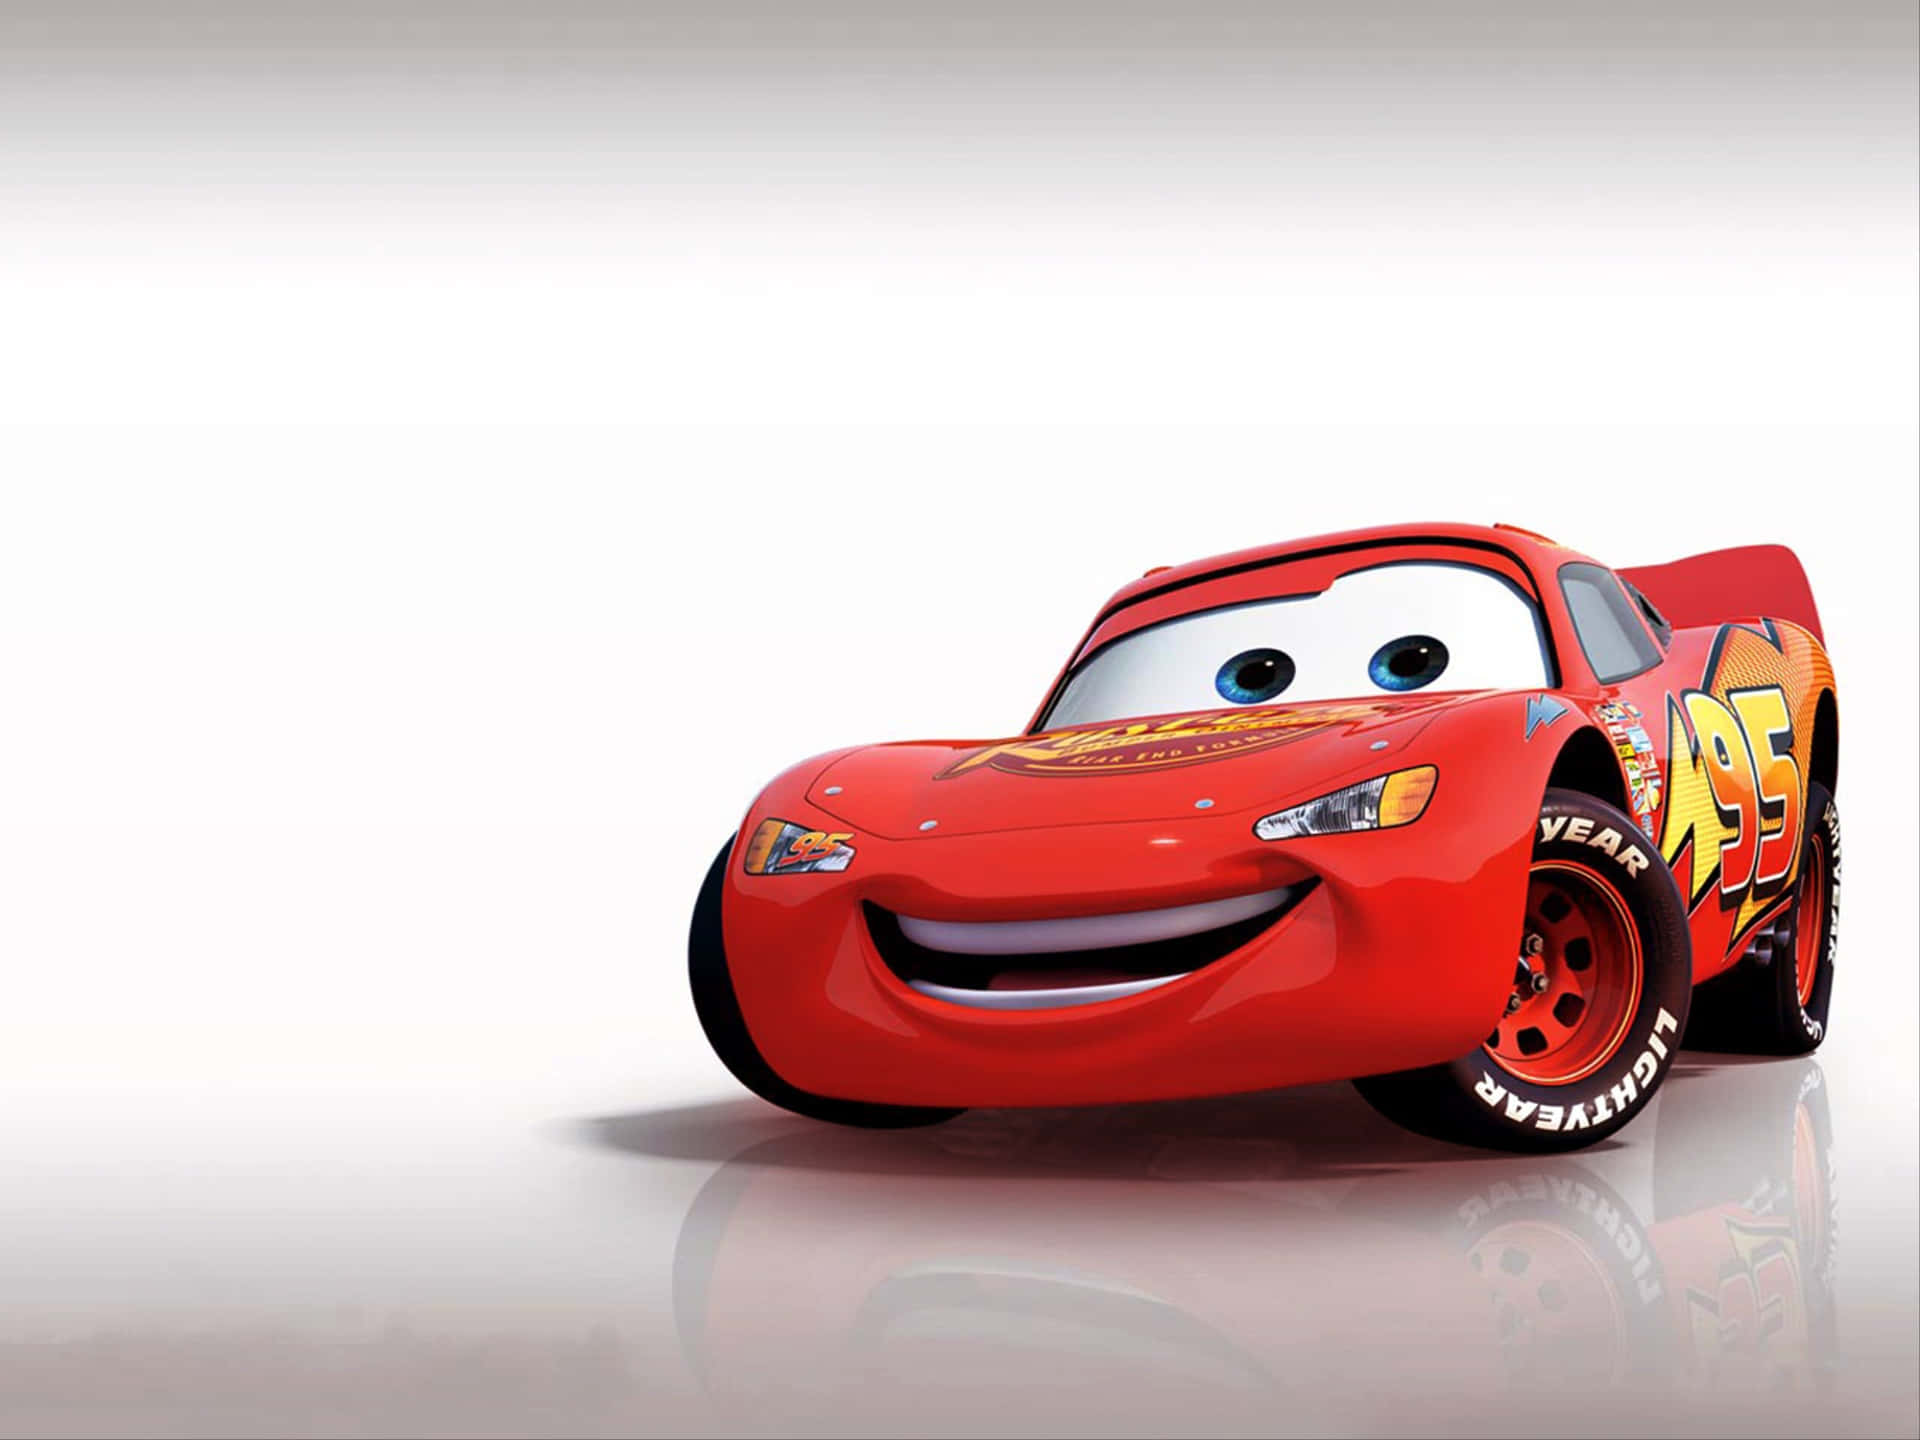 Lightning McQueen is ready to take the Piston Cup!